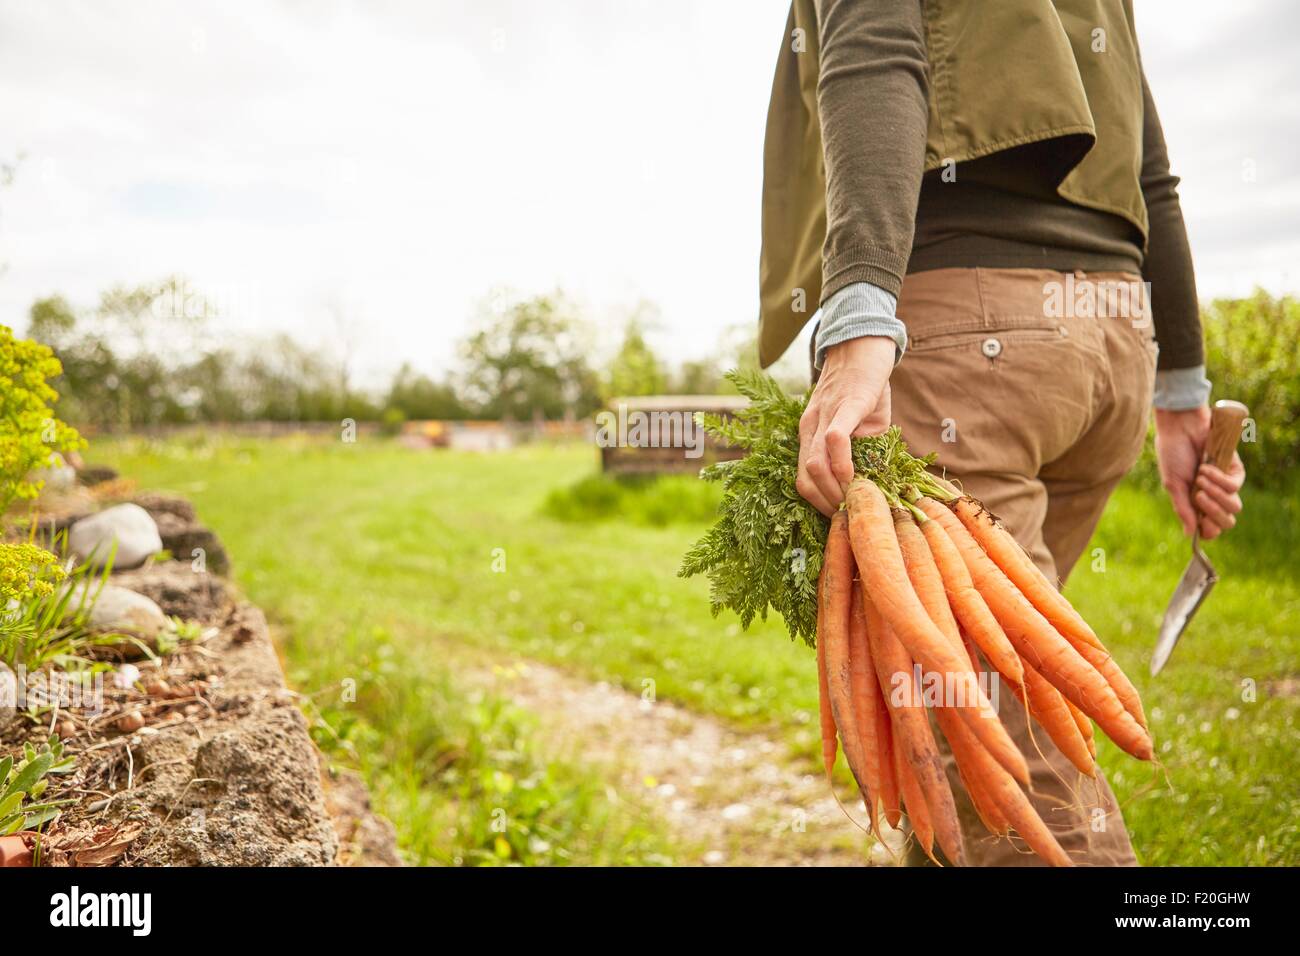 Mature woman outdoors, gardening, holding trowel and bunch of carrots, rear view, mid section Stock Photo